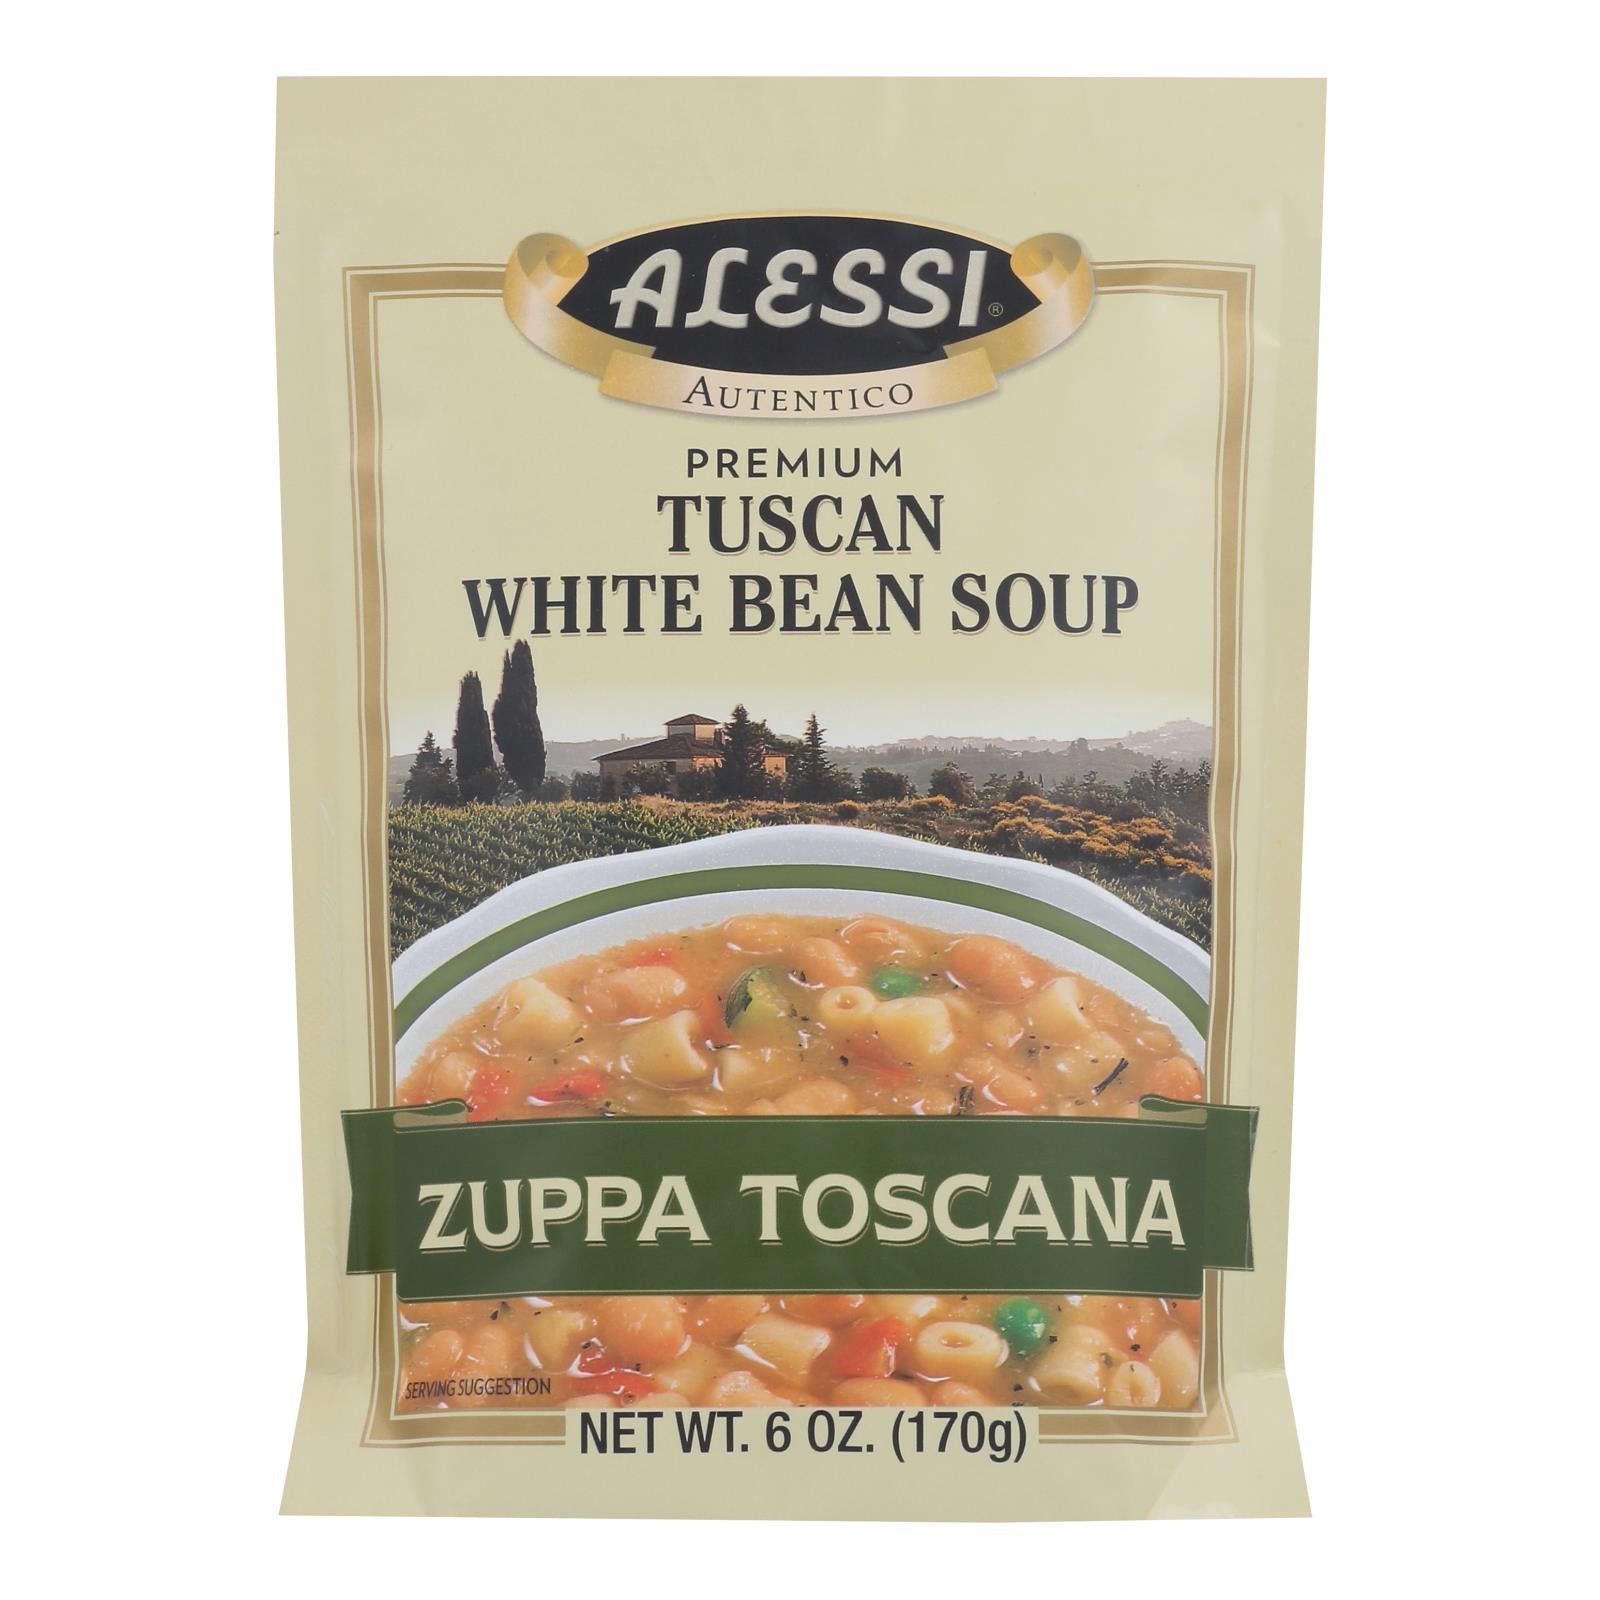 Alessi - Tuscan - White Bean Soup - Case Of 6 - 6 Oz. - Whole Green Foods